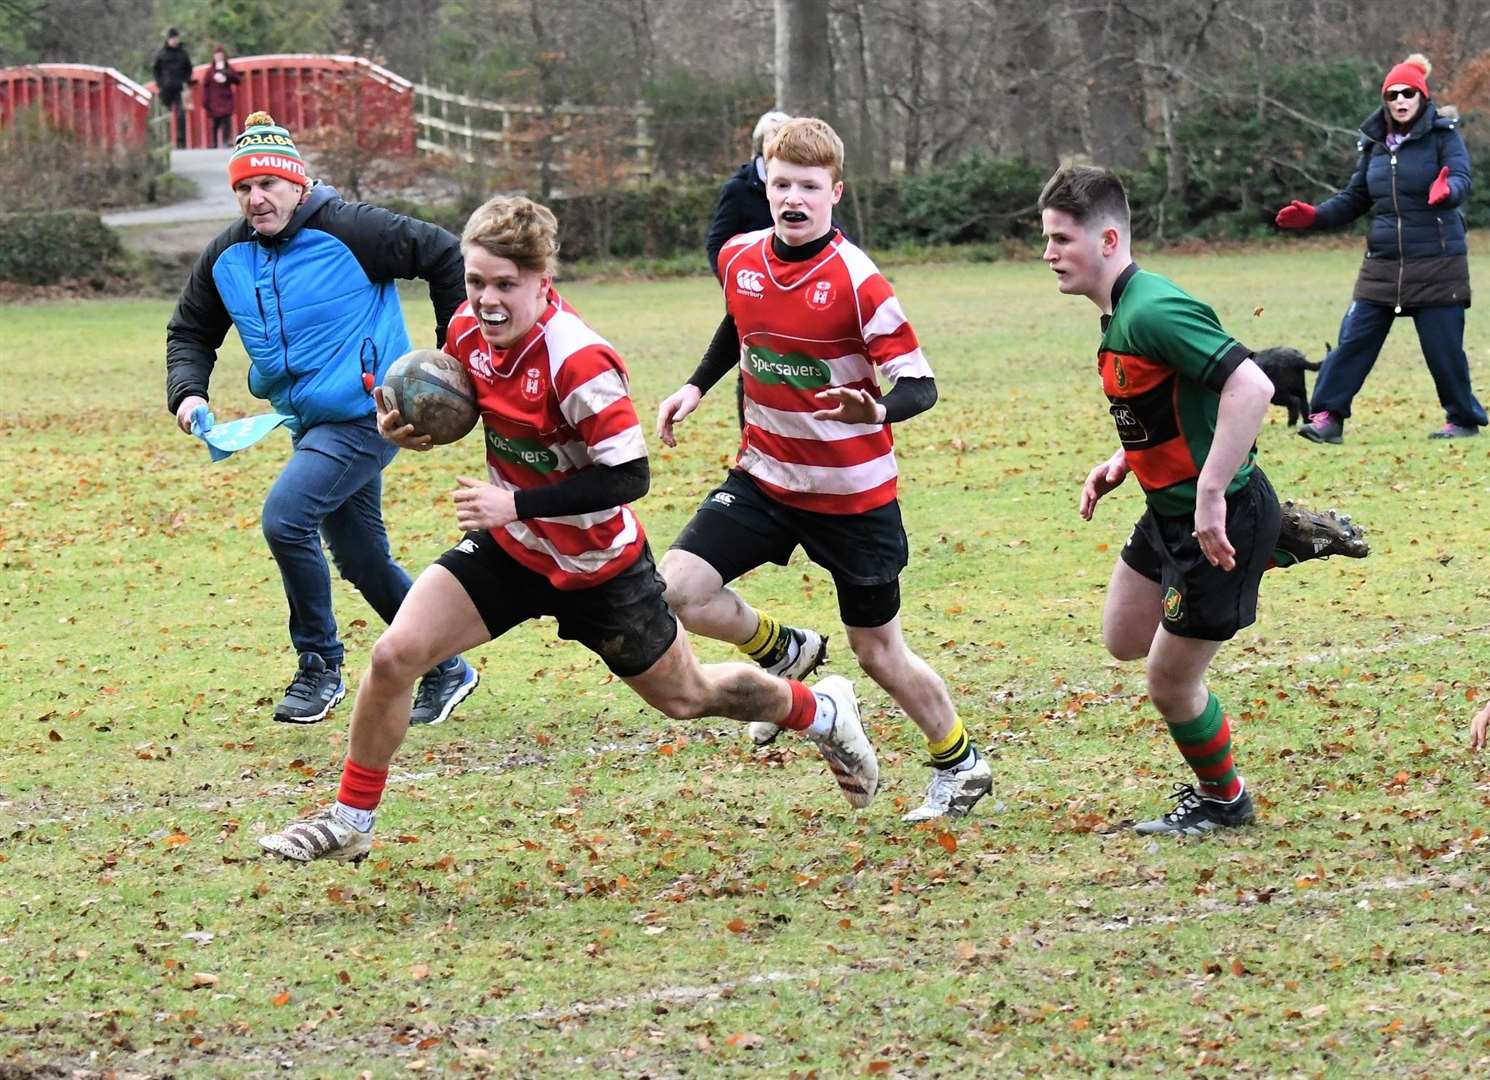 Moray/Huntly in action against Highland at under-16 level. Picture: James Officer